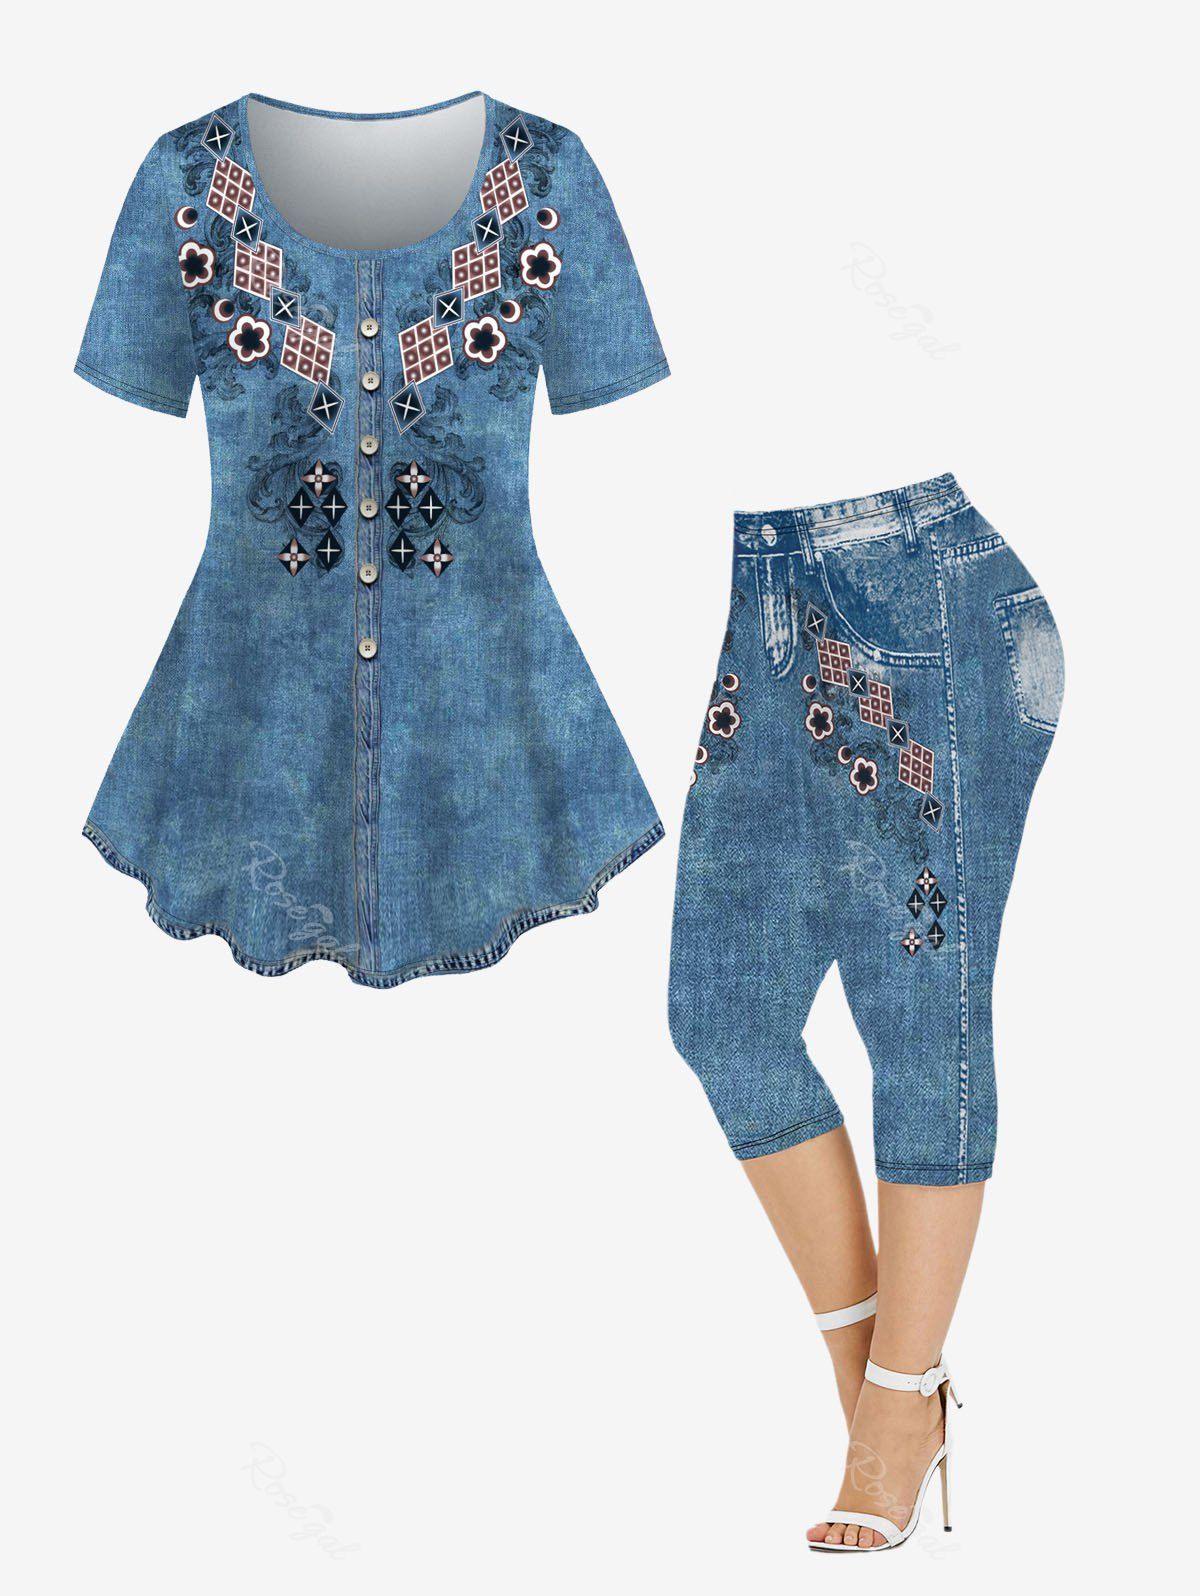 Affordable 3D Jeans Geo Flower Printed Tee and Leggings Plus Size Matching Set  